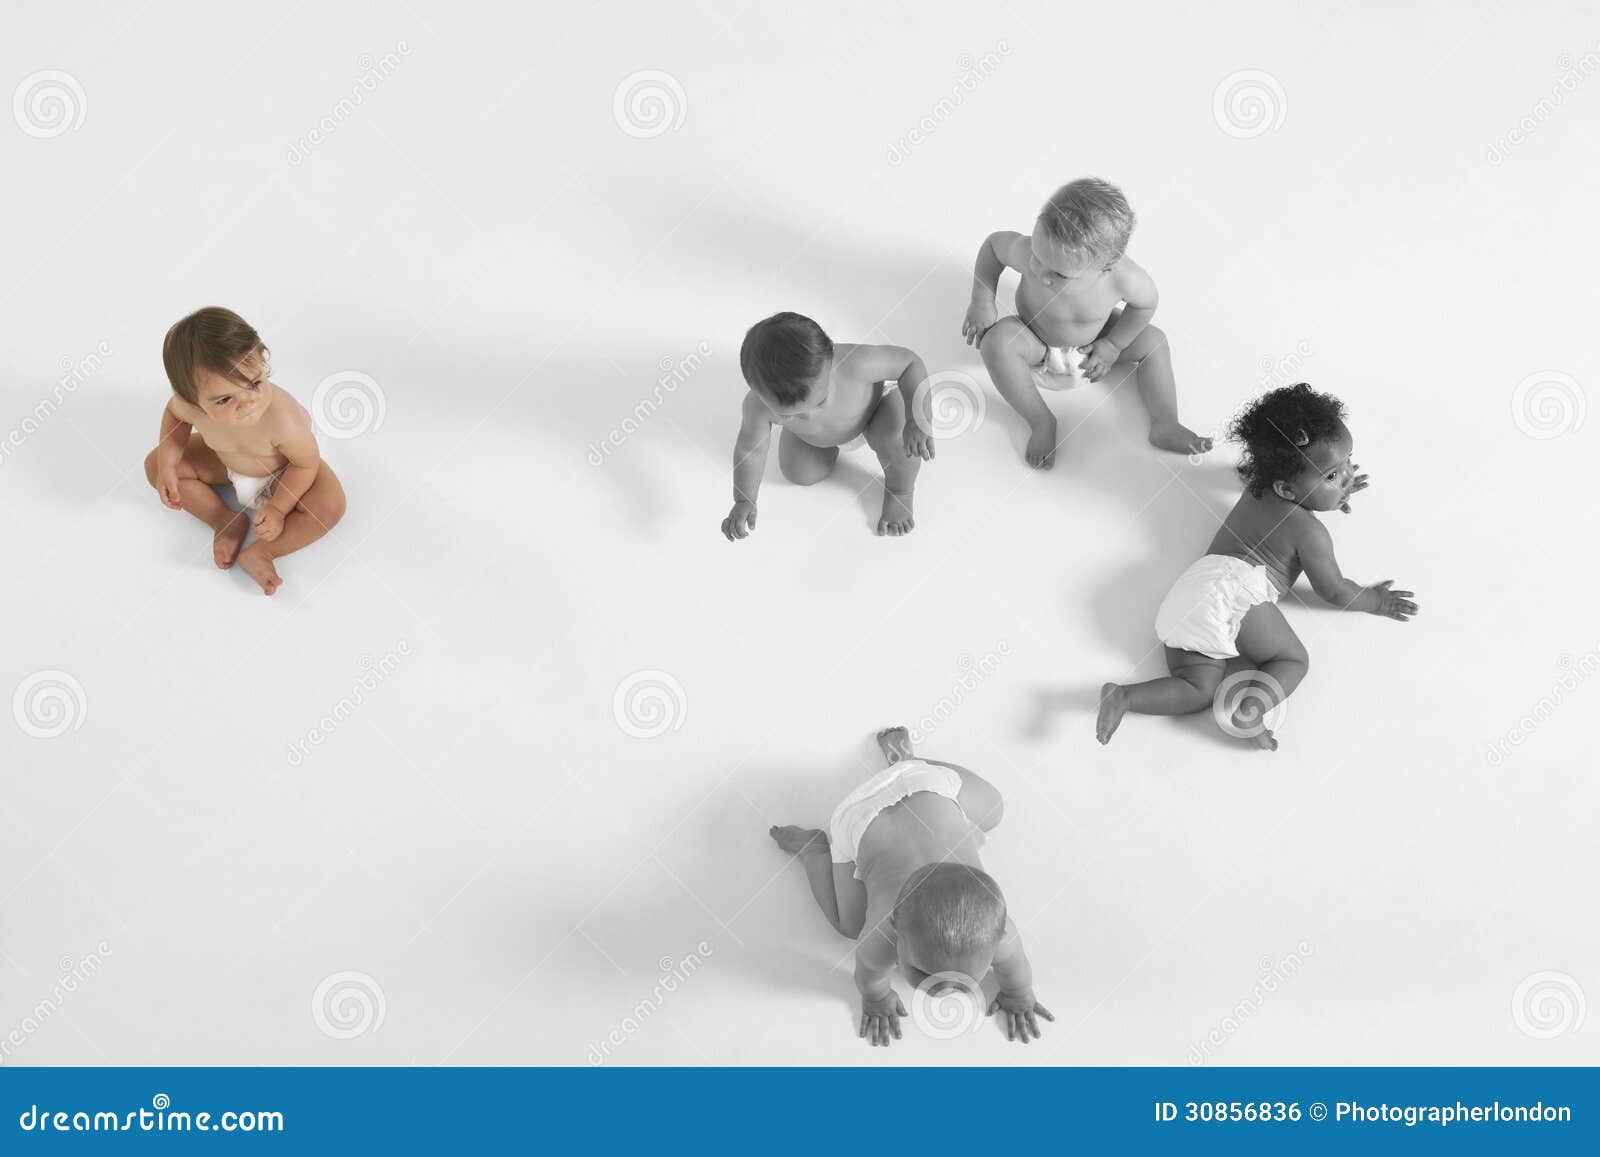 high angle view of baby girl looking at other babies crawling on floor